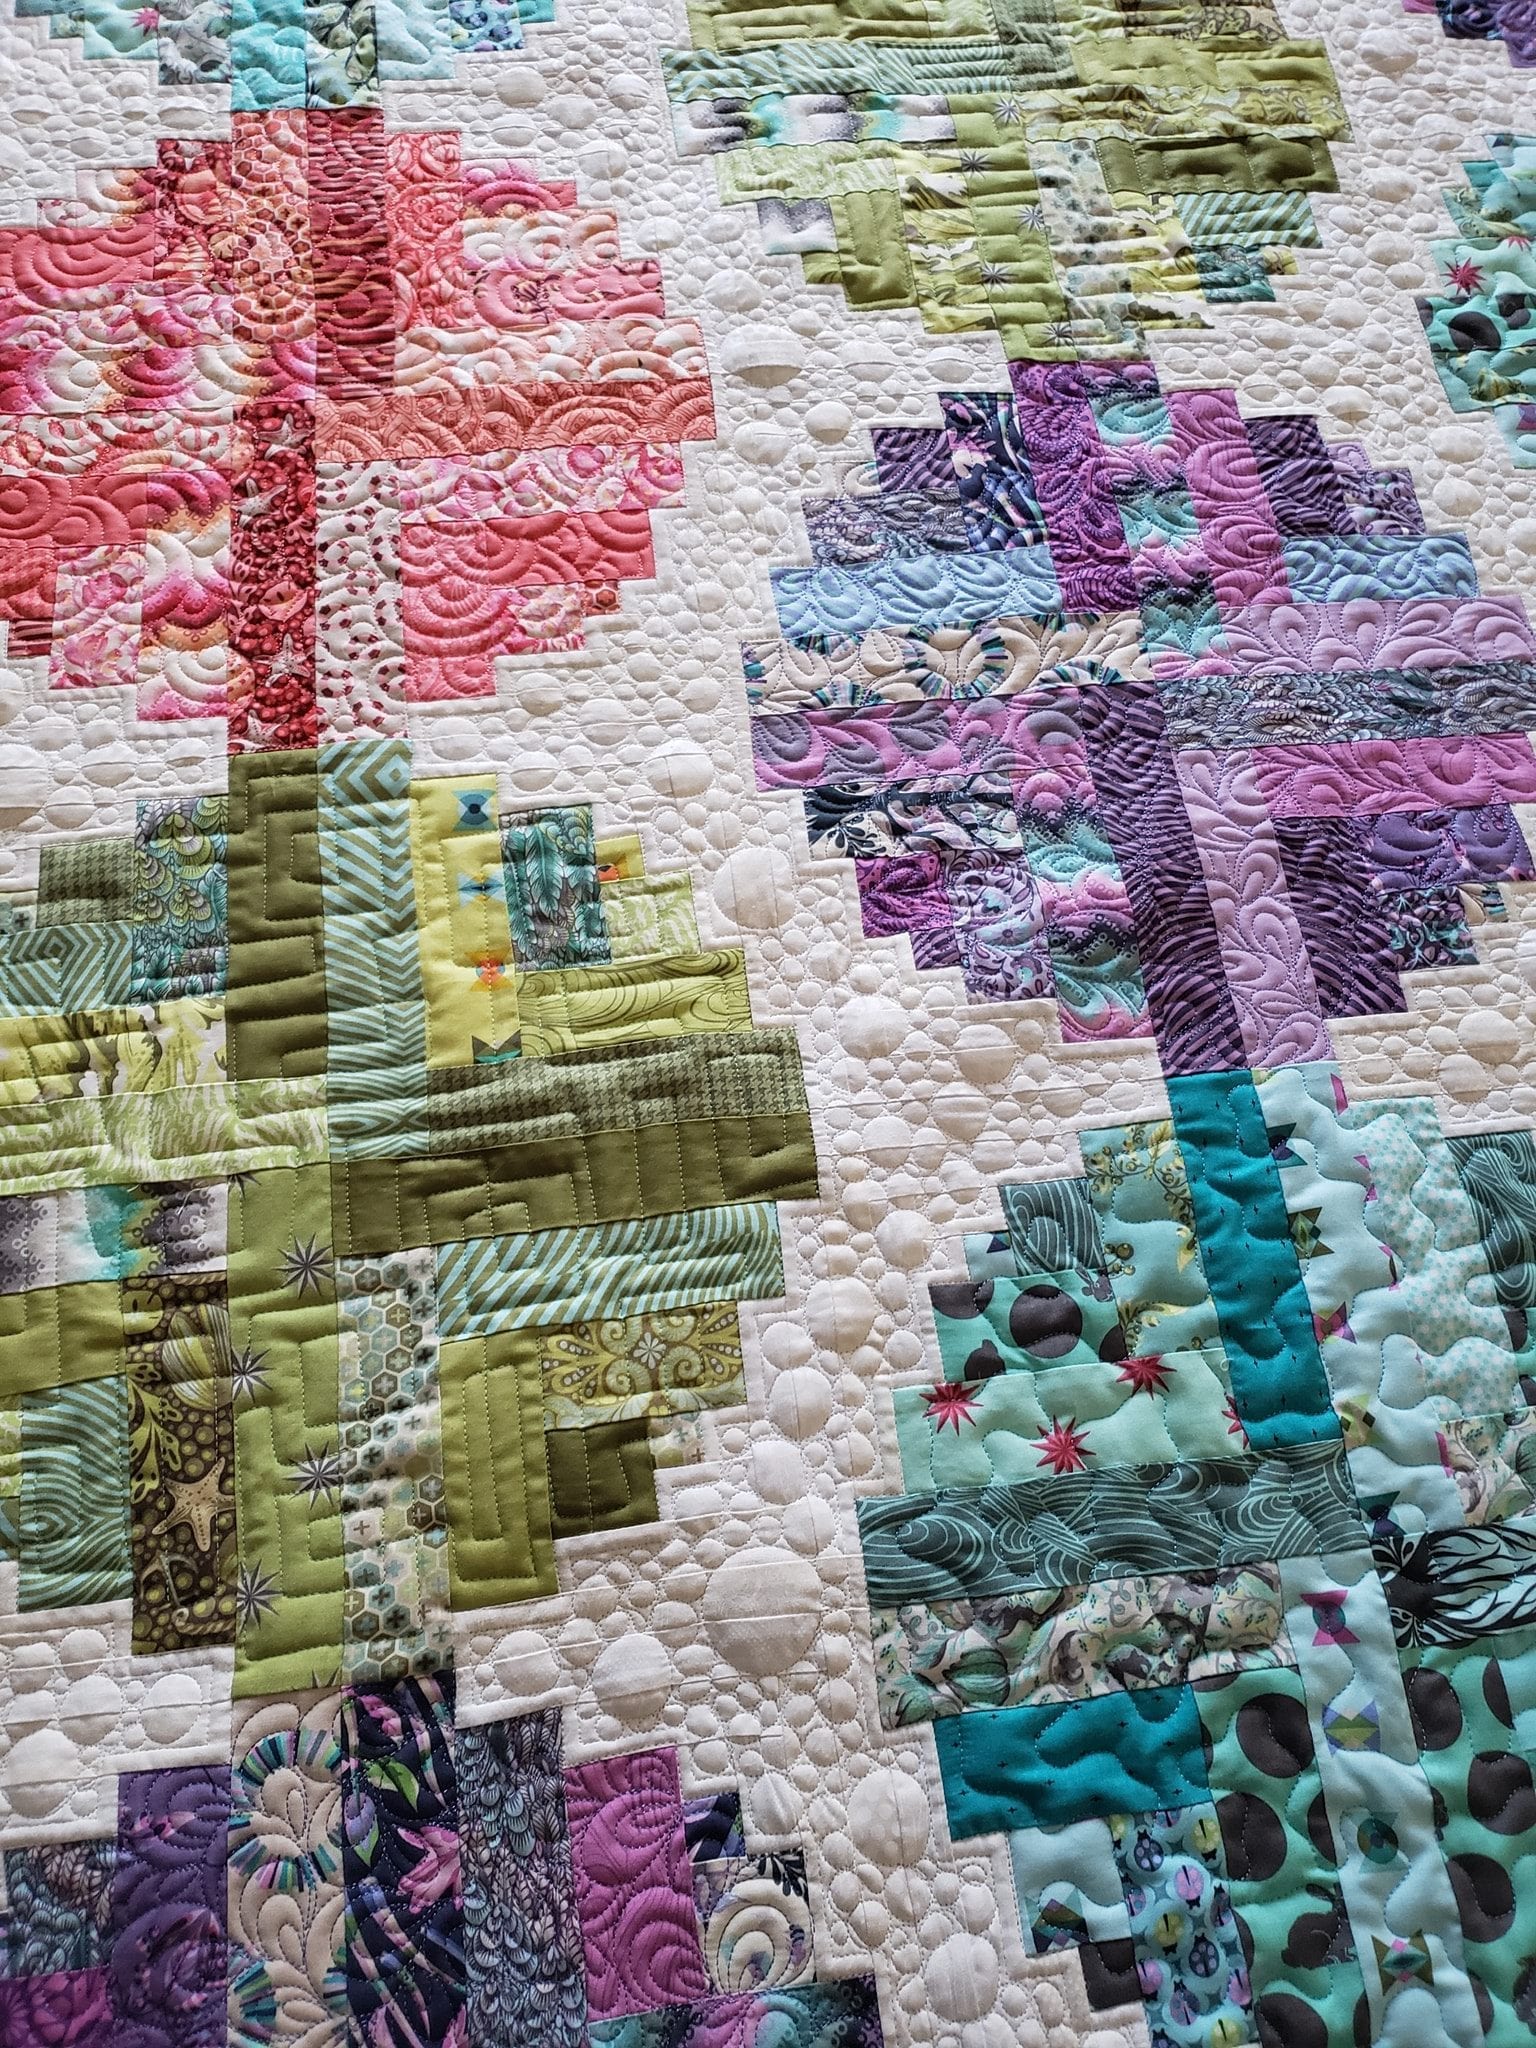 Free Motion Quilting 101